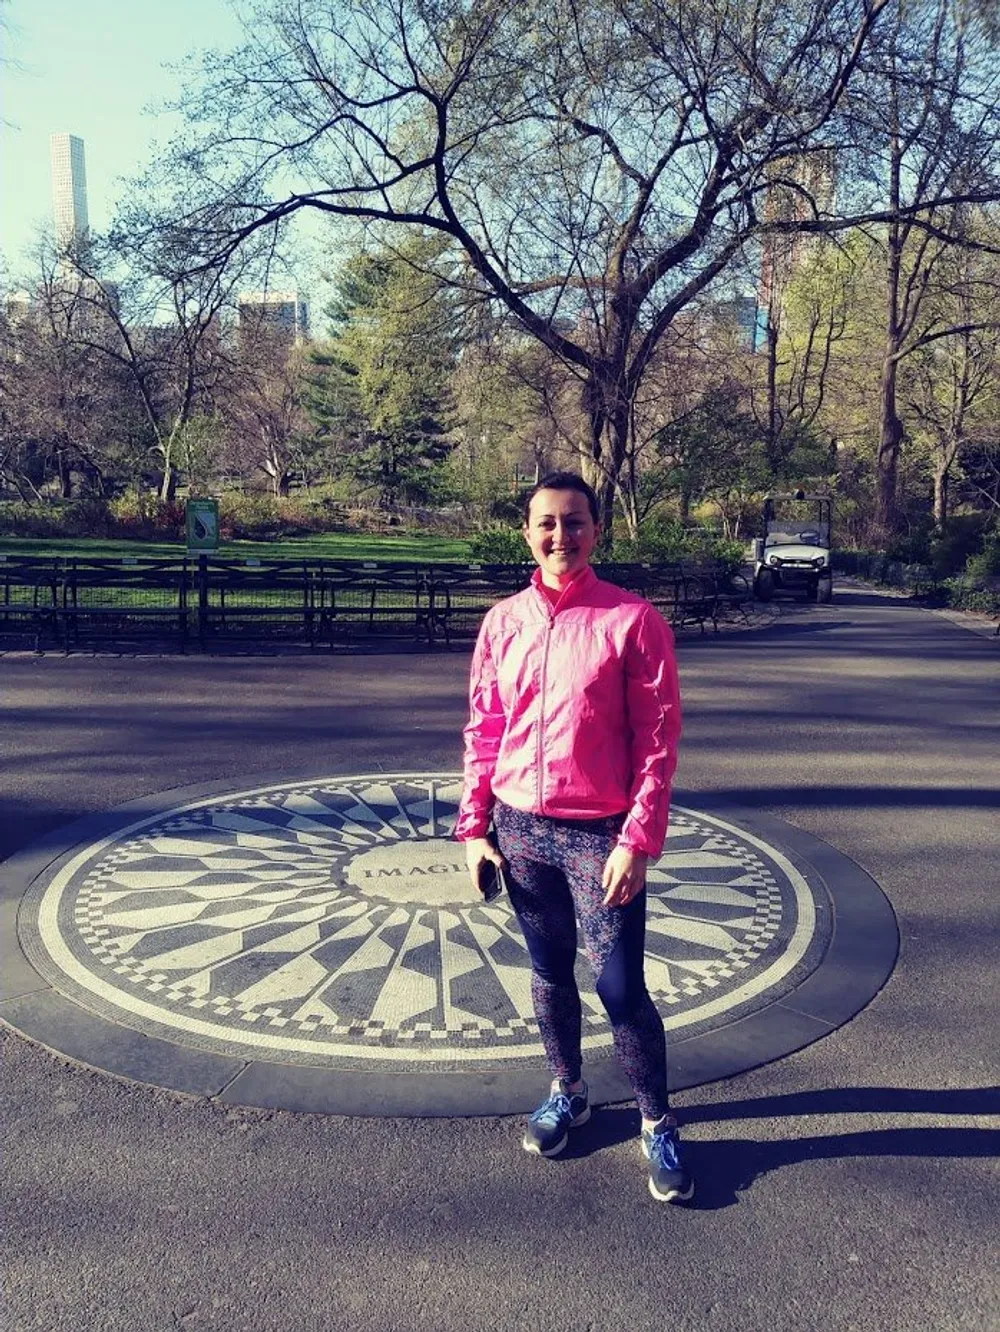 A person is standing on a circular patterned pavement with the word Imagine inscribed on it in a sunny park setting with trees and a high-rise building in the background